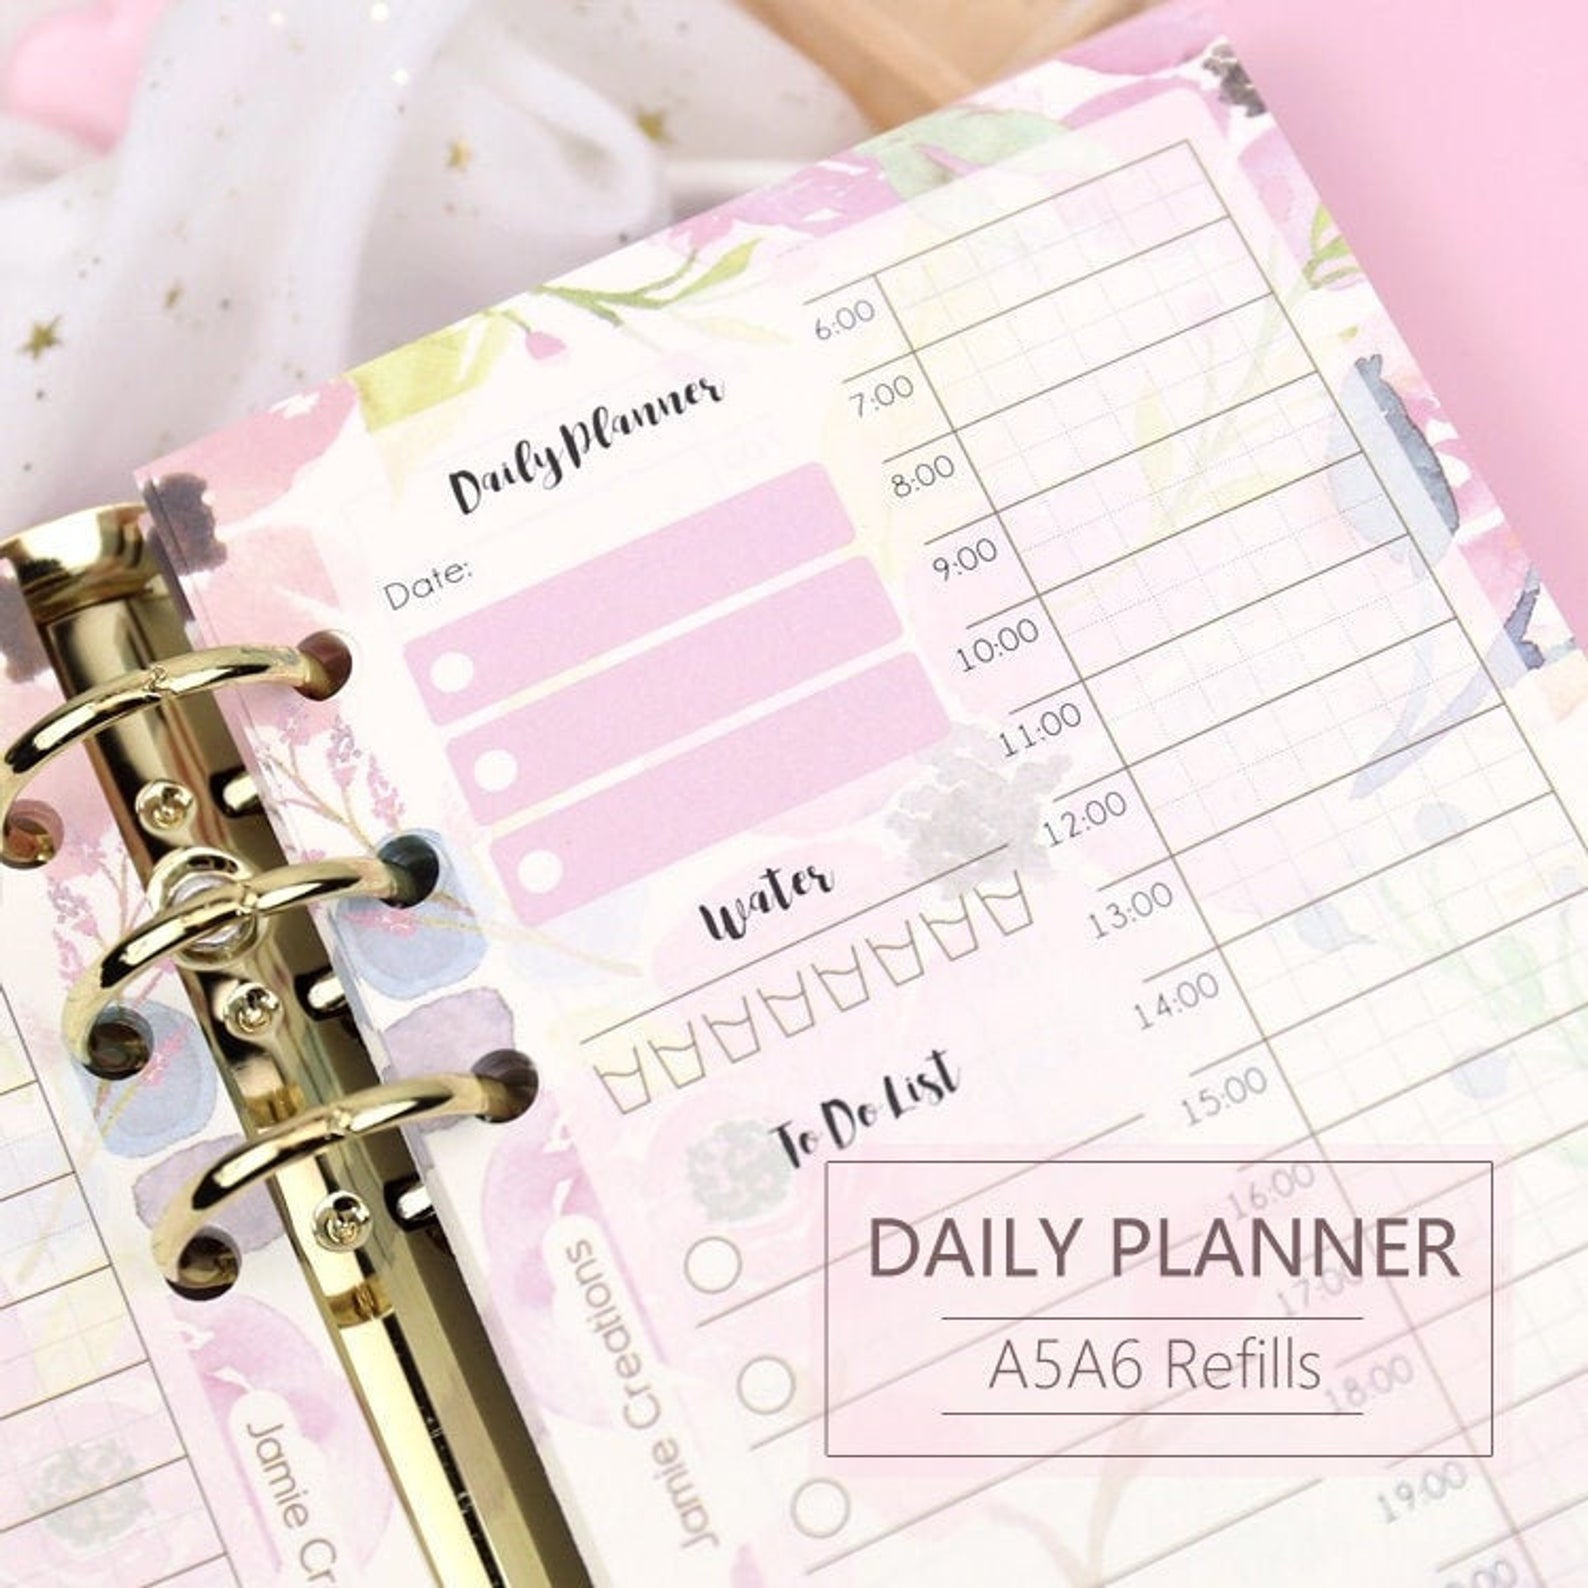  A5 Refill Paper, Weekly Planner Daily Planner Refill